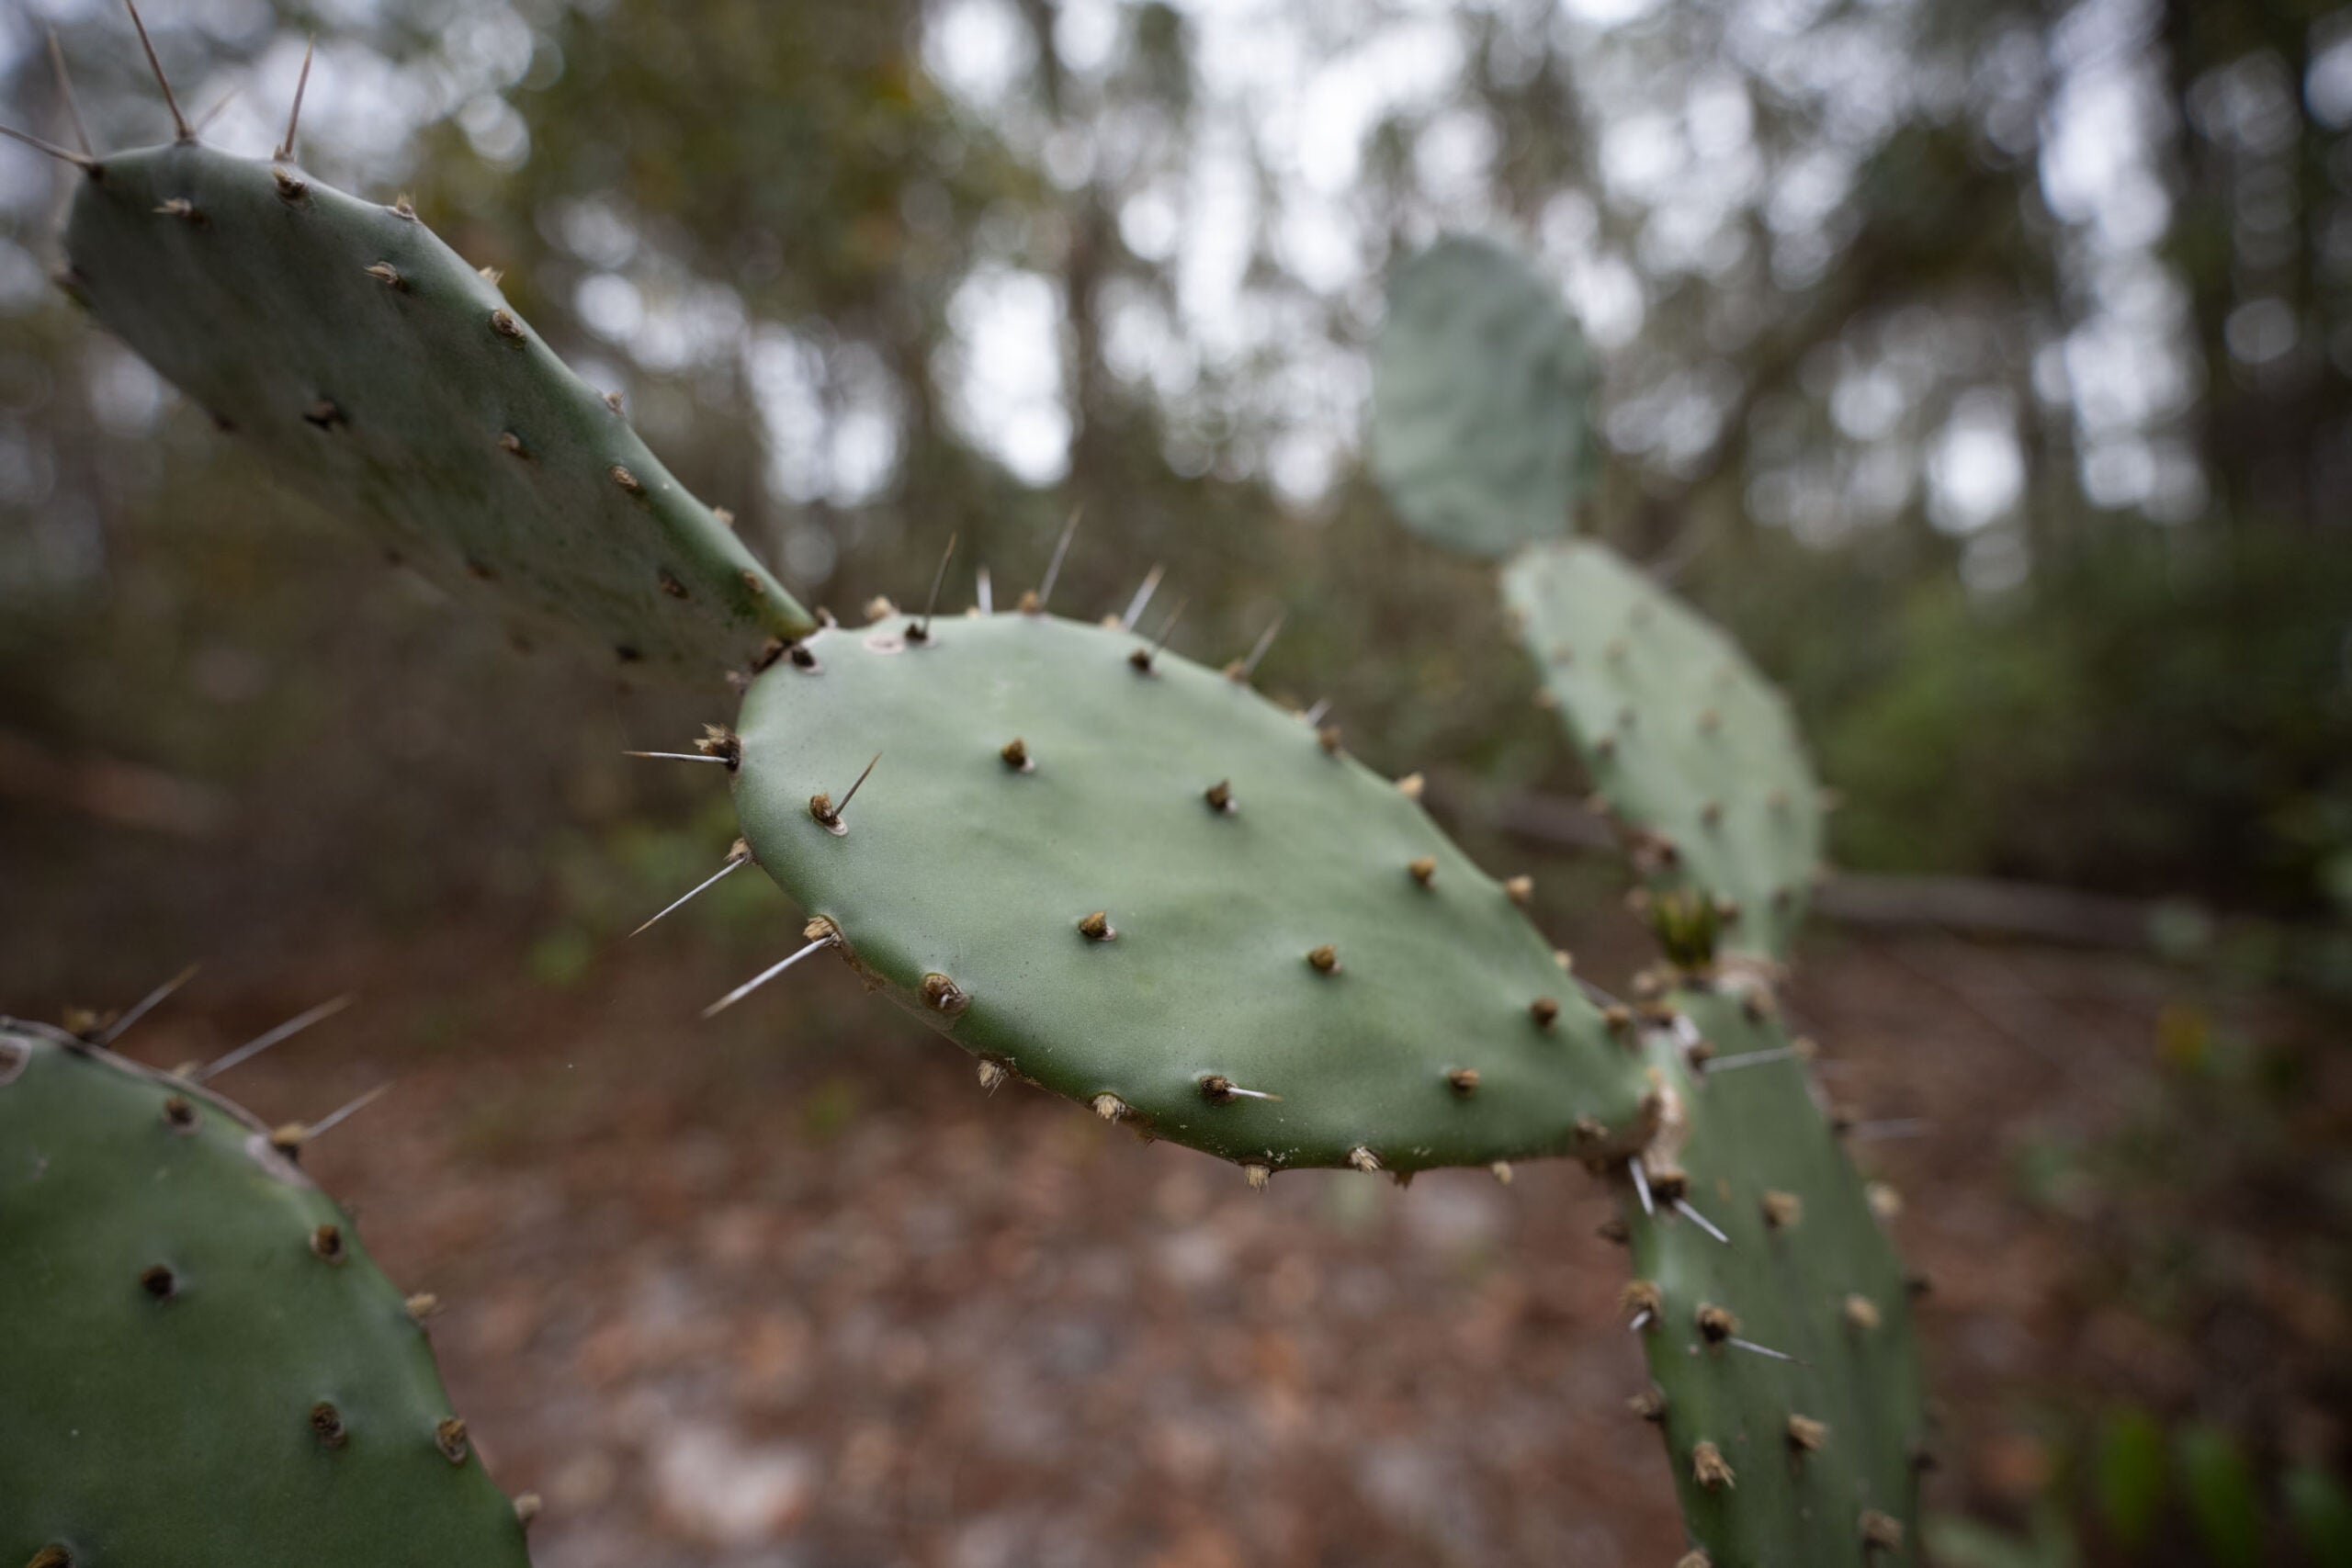 A cactus in the forest